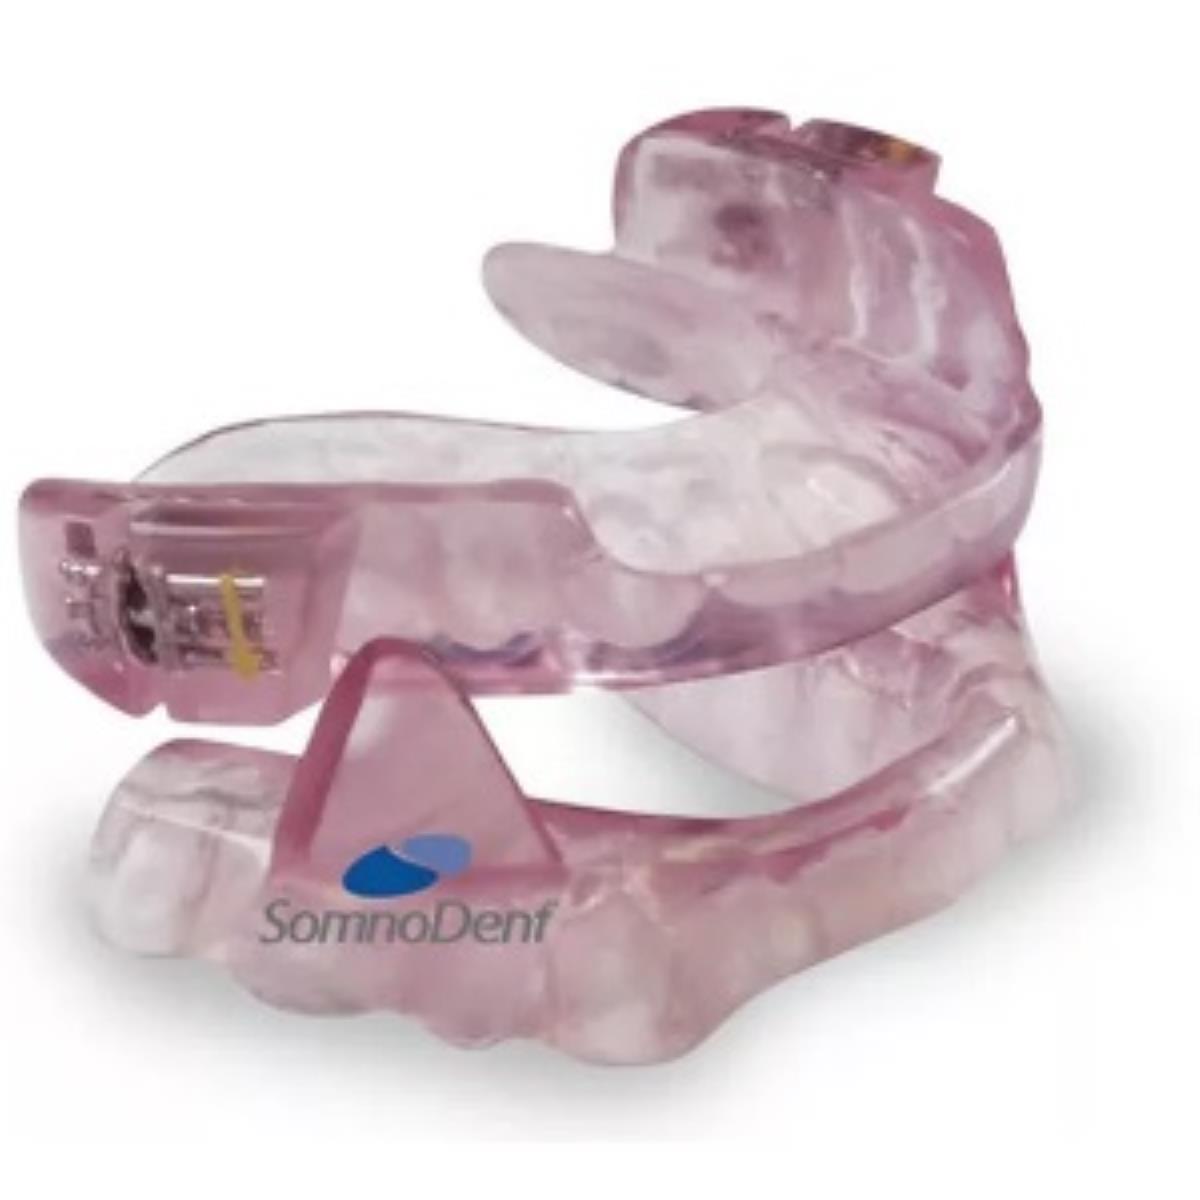 Somnodent Oral Device 